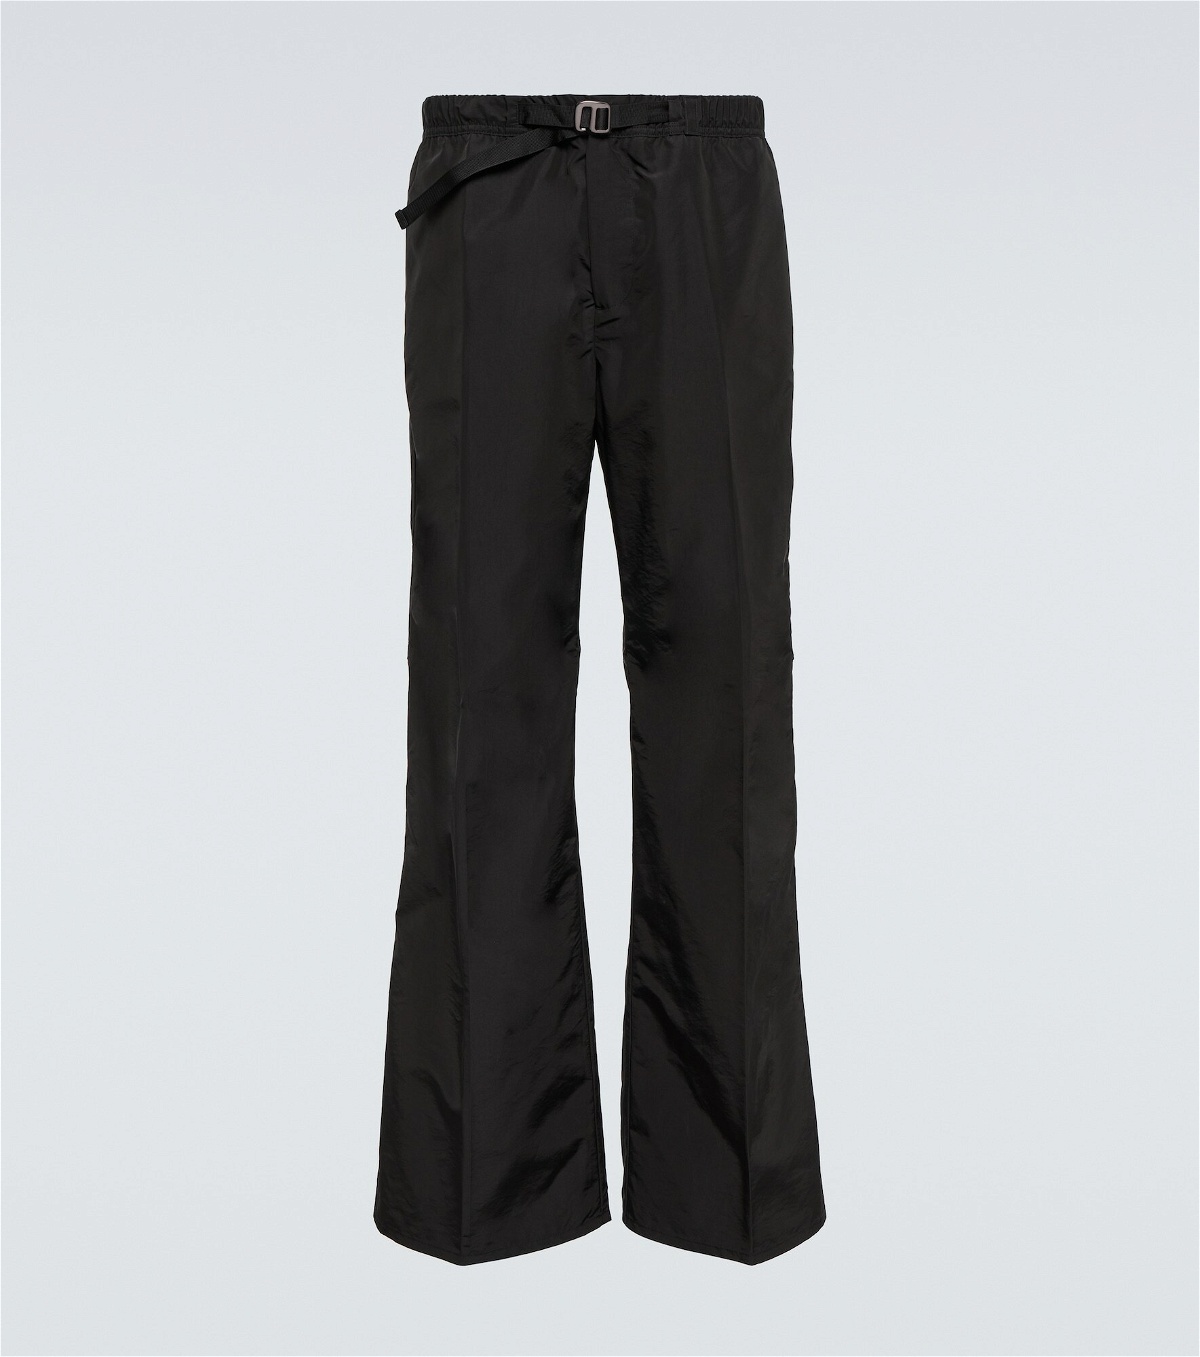 Our Legacy - Wander wide pants